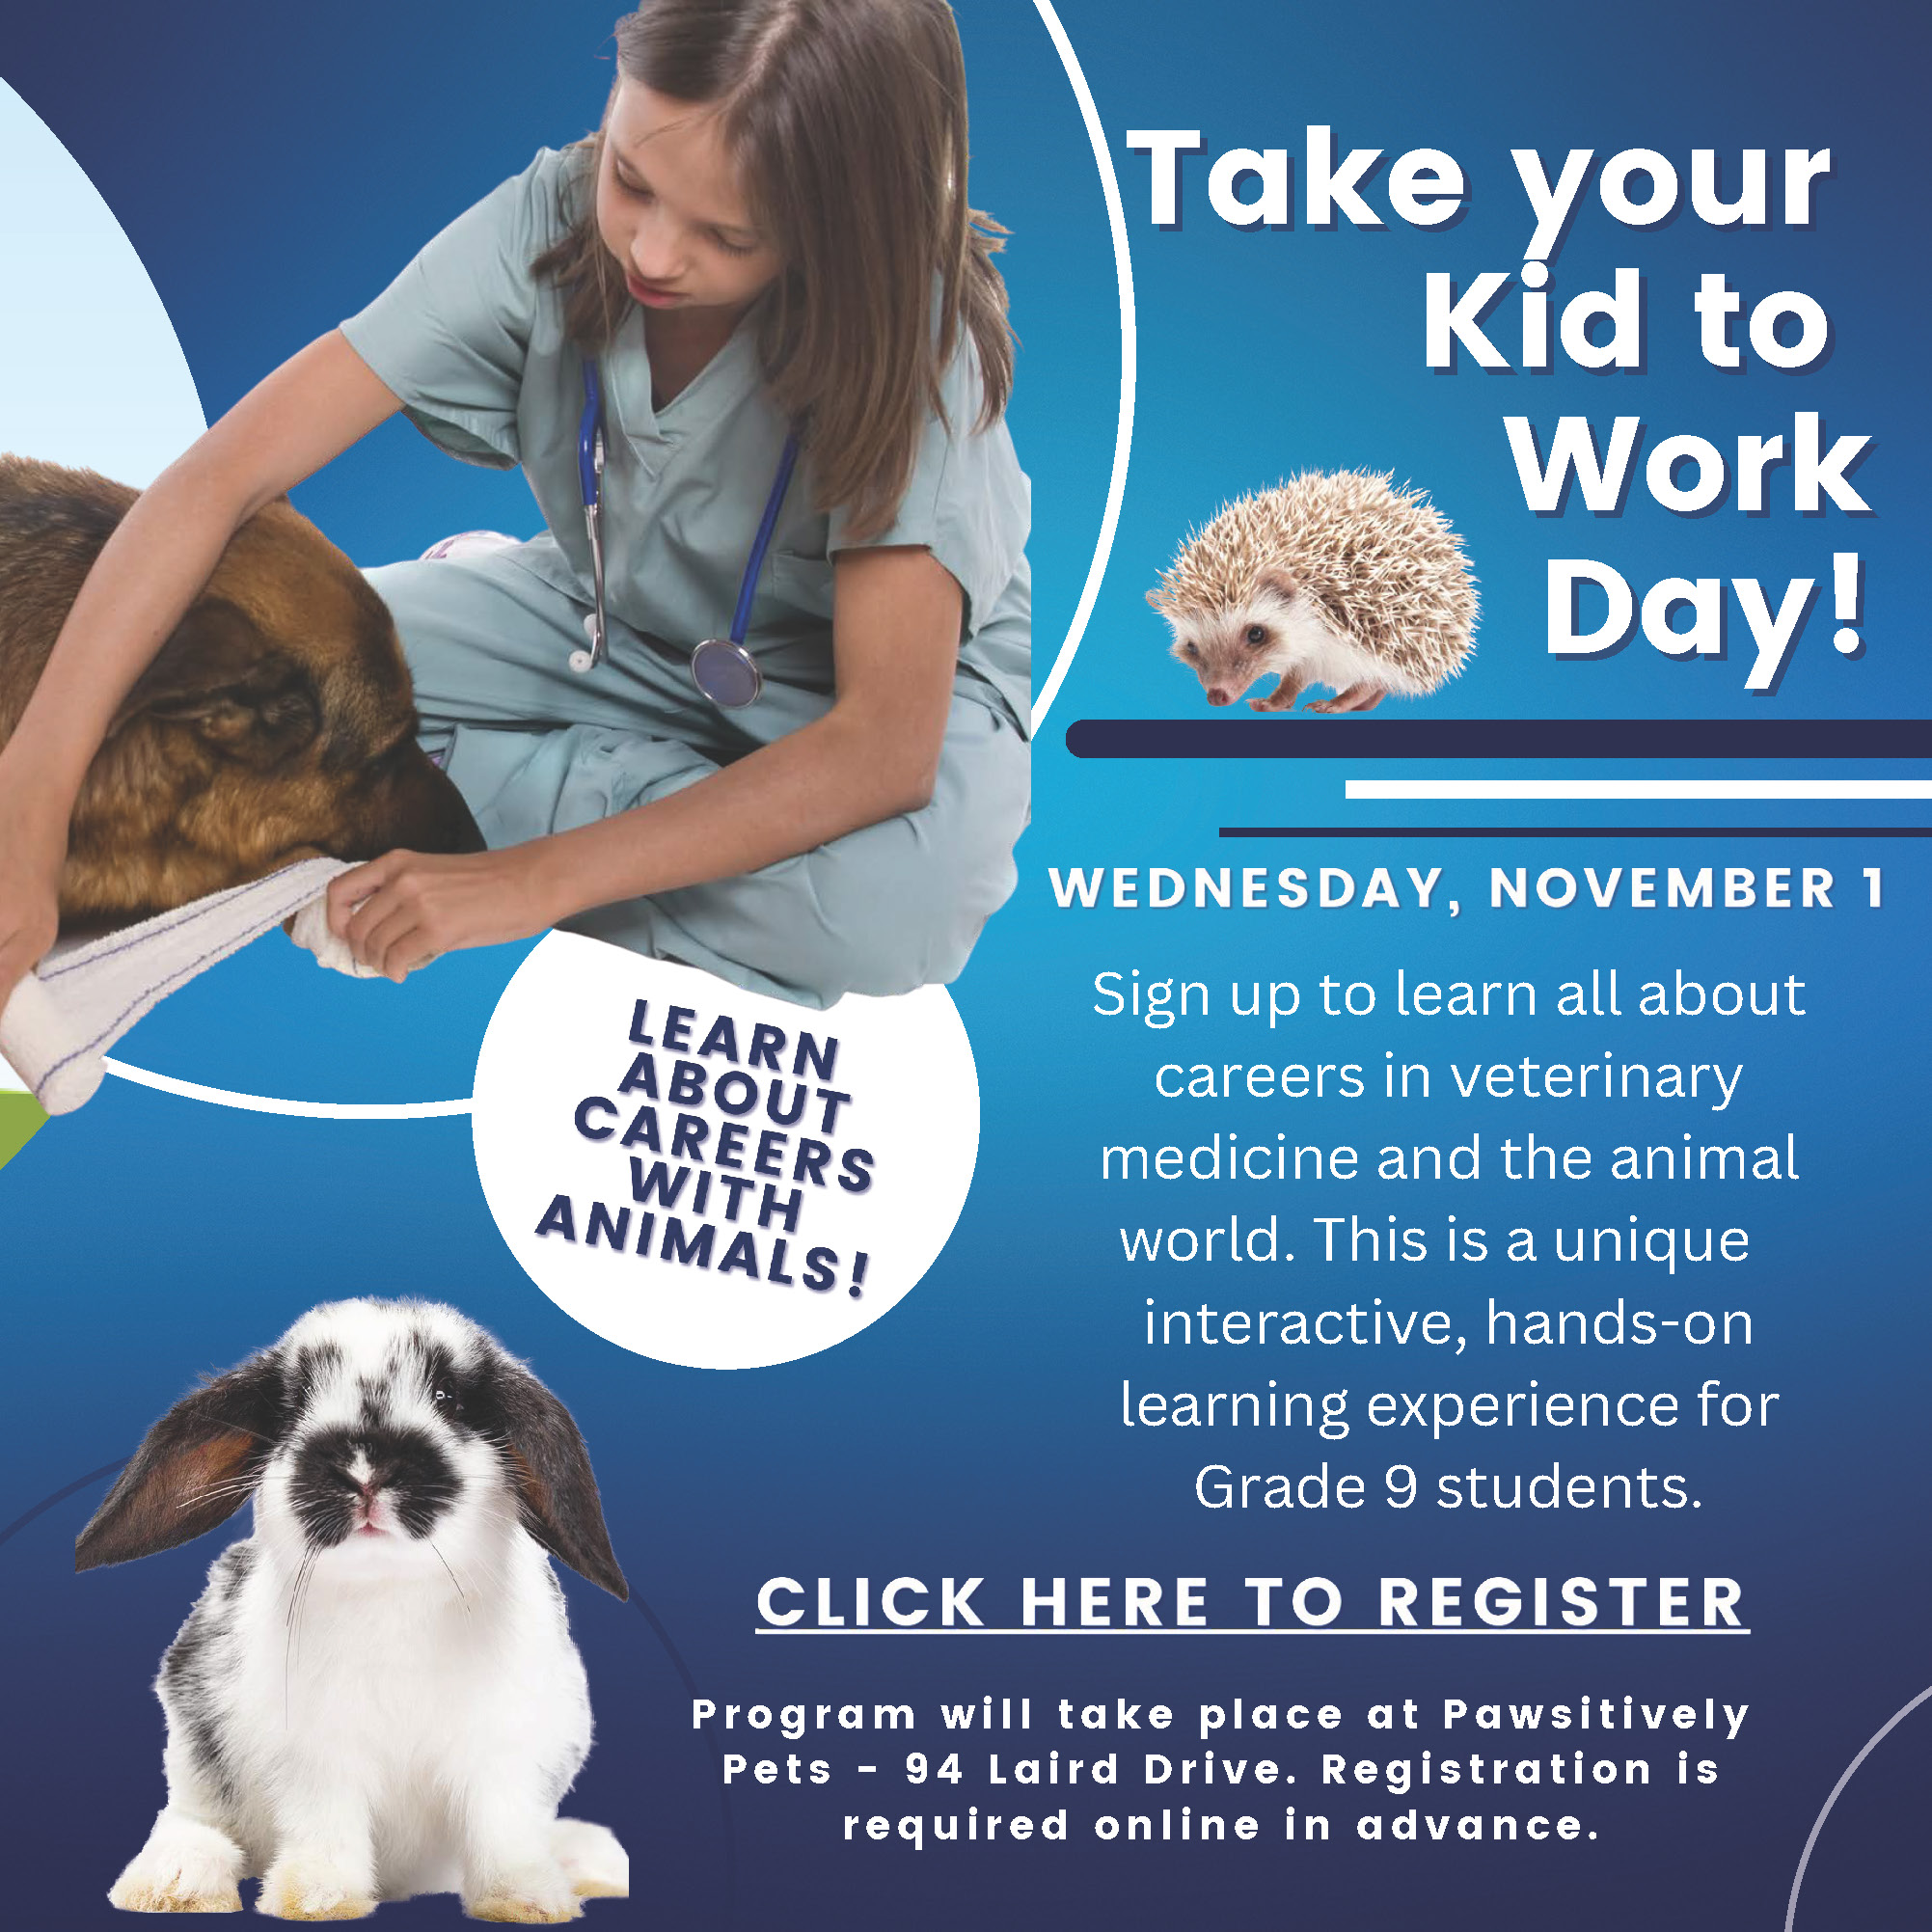 Take your Kid to Work Day! Wednesday, November 1 - Sign up to learn all about careers in veterinary medicine and the animal world. This is a unique interactive, hands-on learning experience for Grade 9 students. Click to Register. Program will take place at Pawsitively Pets - 94 Laird Drive. Registration is required online in advance.